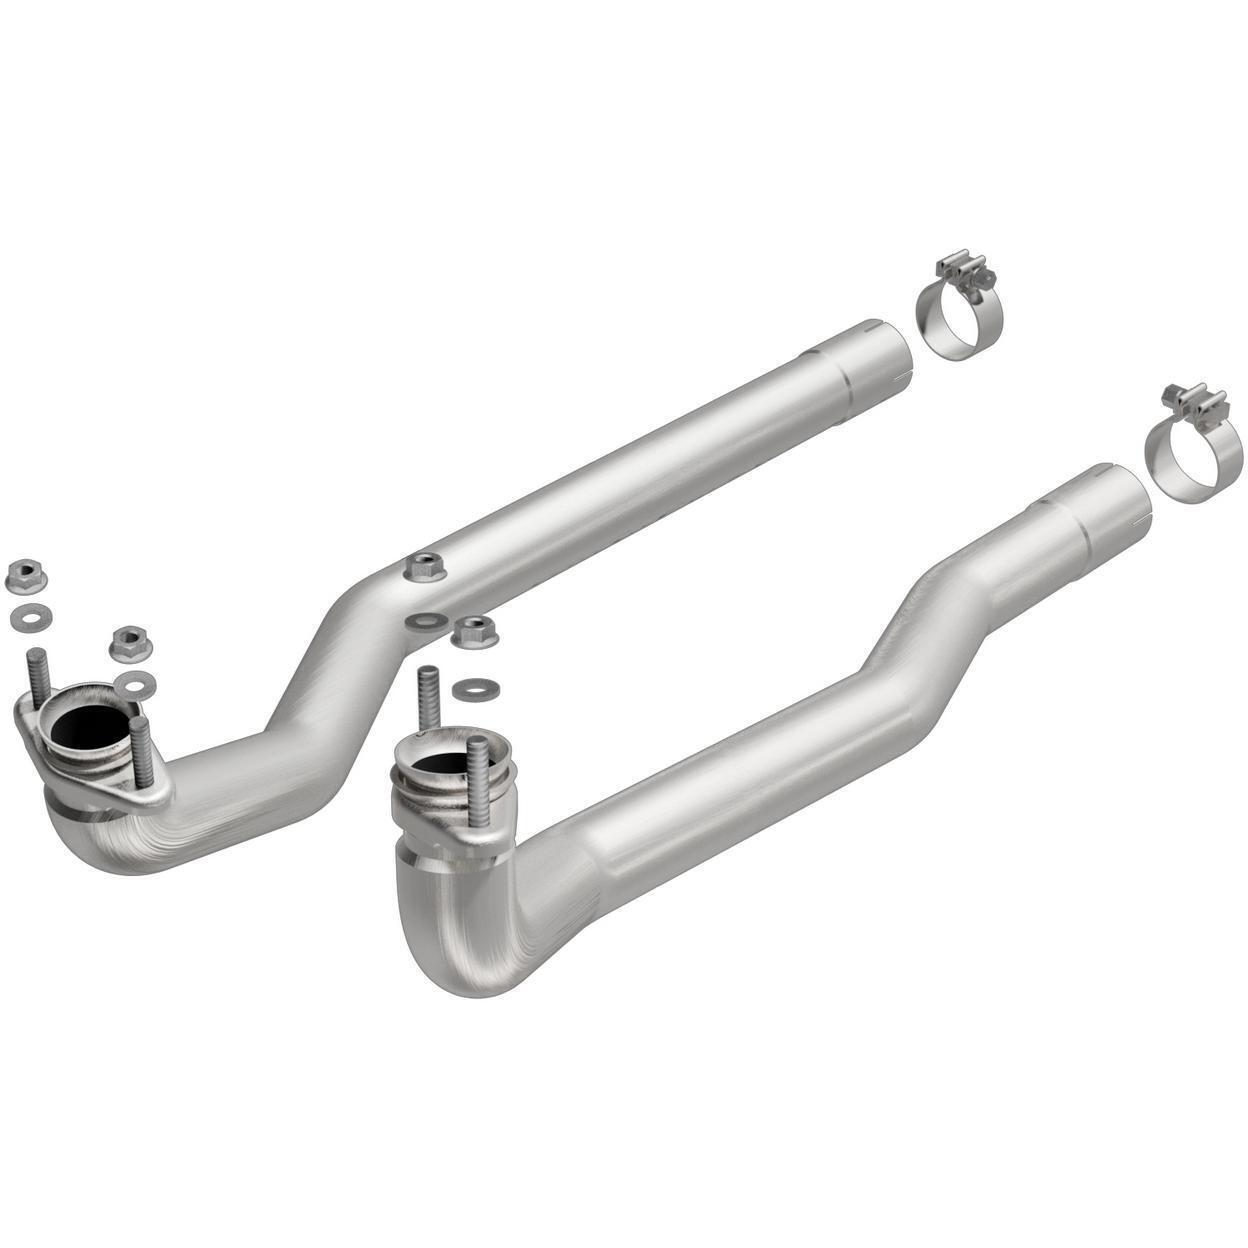 MagnaFlow 19343-AW for 1978 Plymouth Fury 5.2L V8 GAS OHV